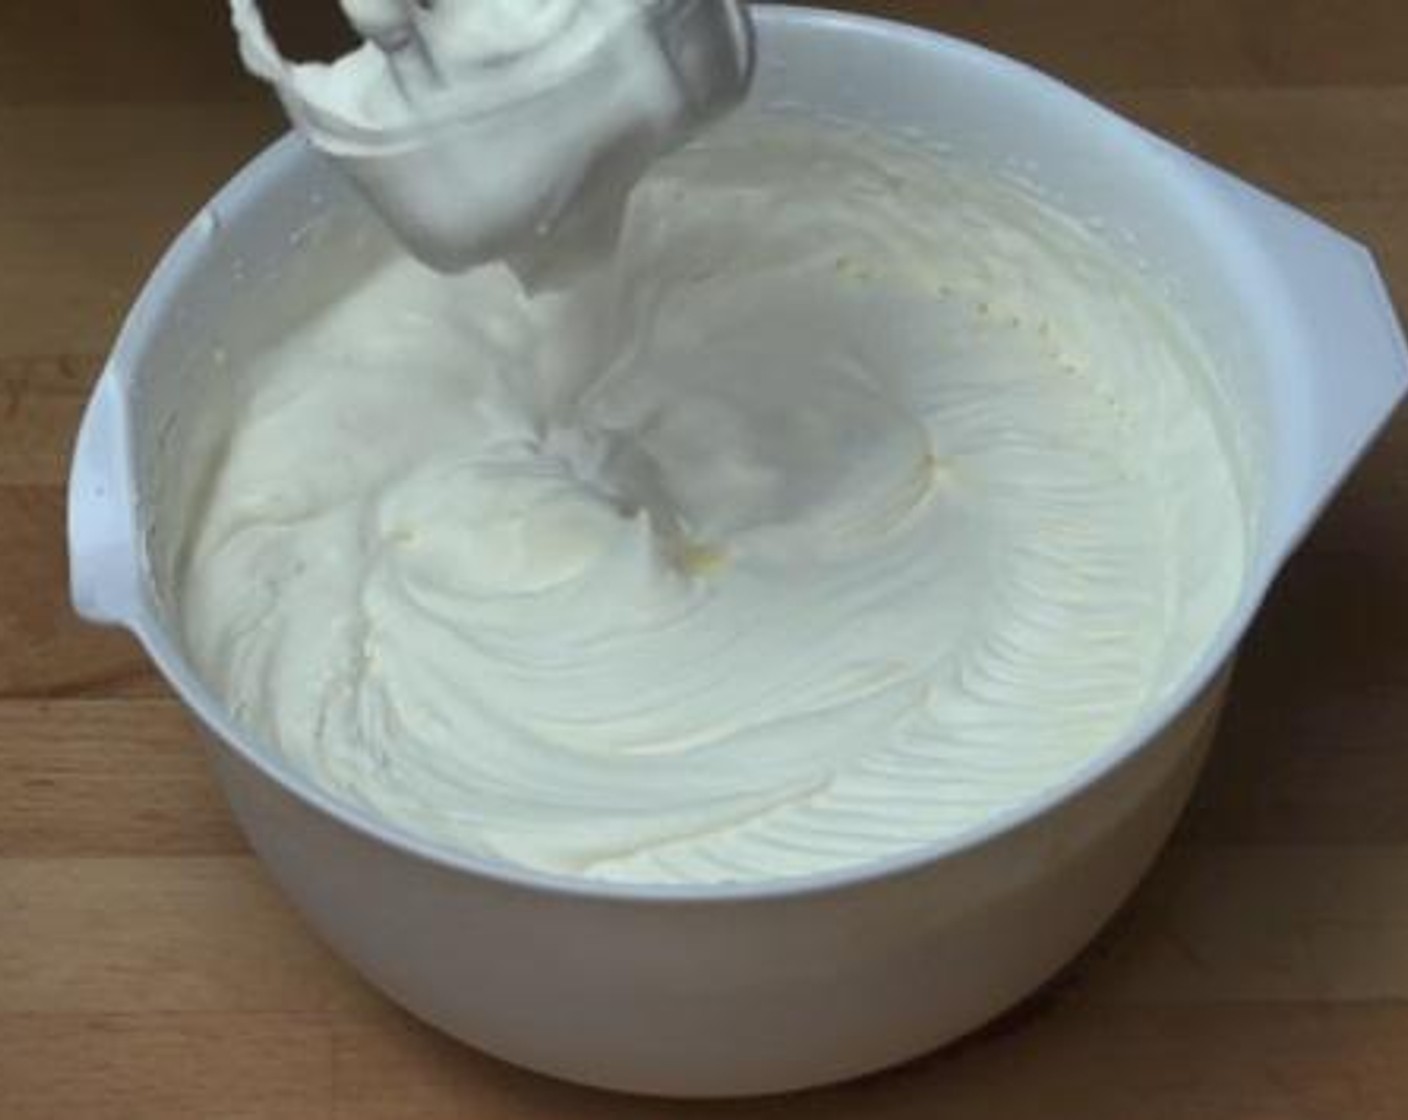 step 3 In another mixing bowl, add and whip together the Cream (3 3/4 cups), Caster Sugar (1 Tbsp), and Vanilla Extract (1 tsp).